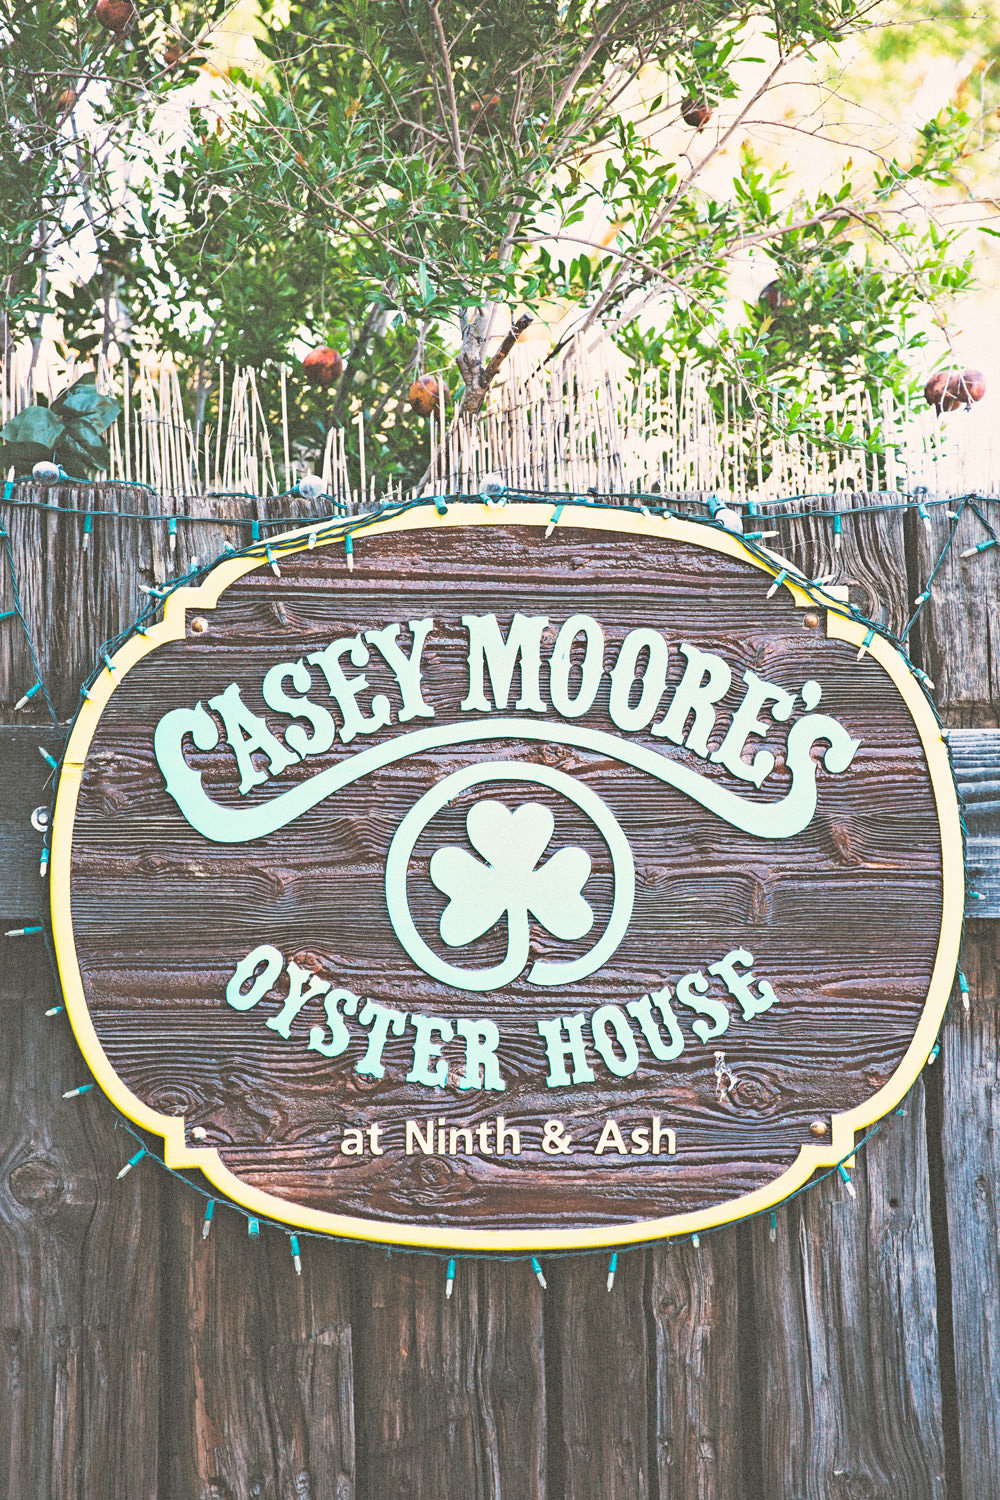 Casey Moore's Oyster House Tempe